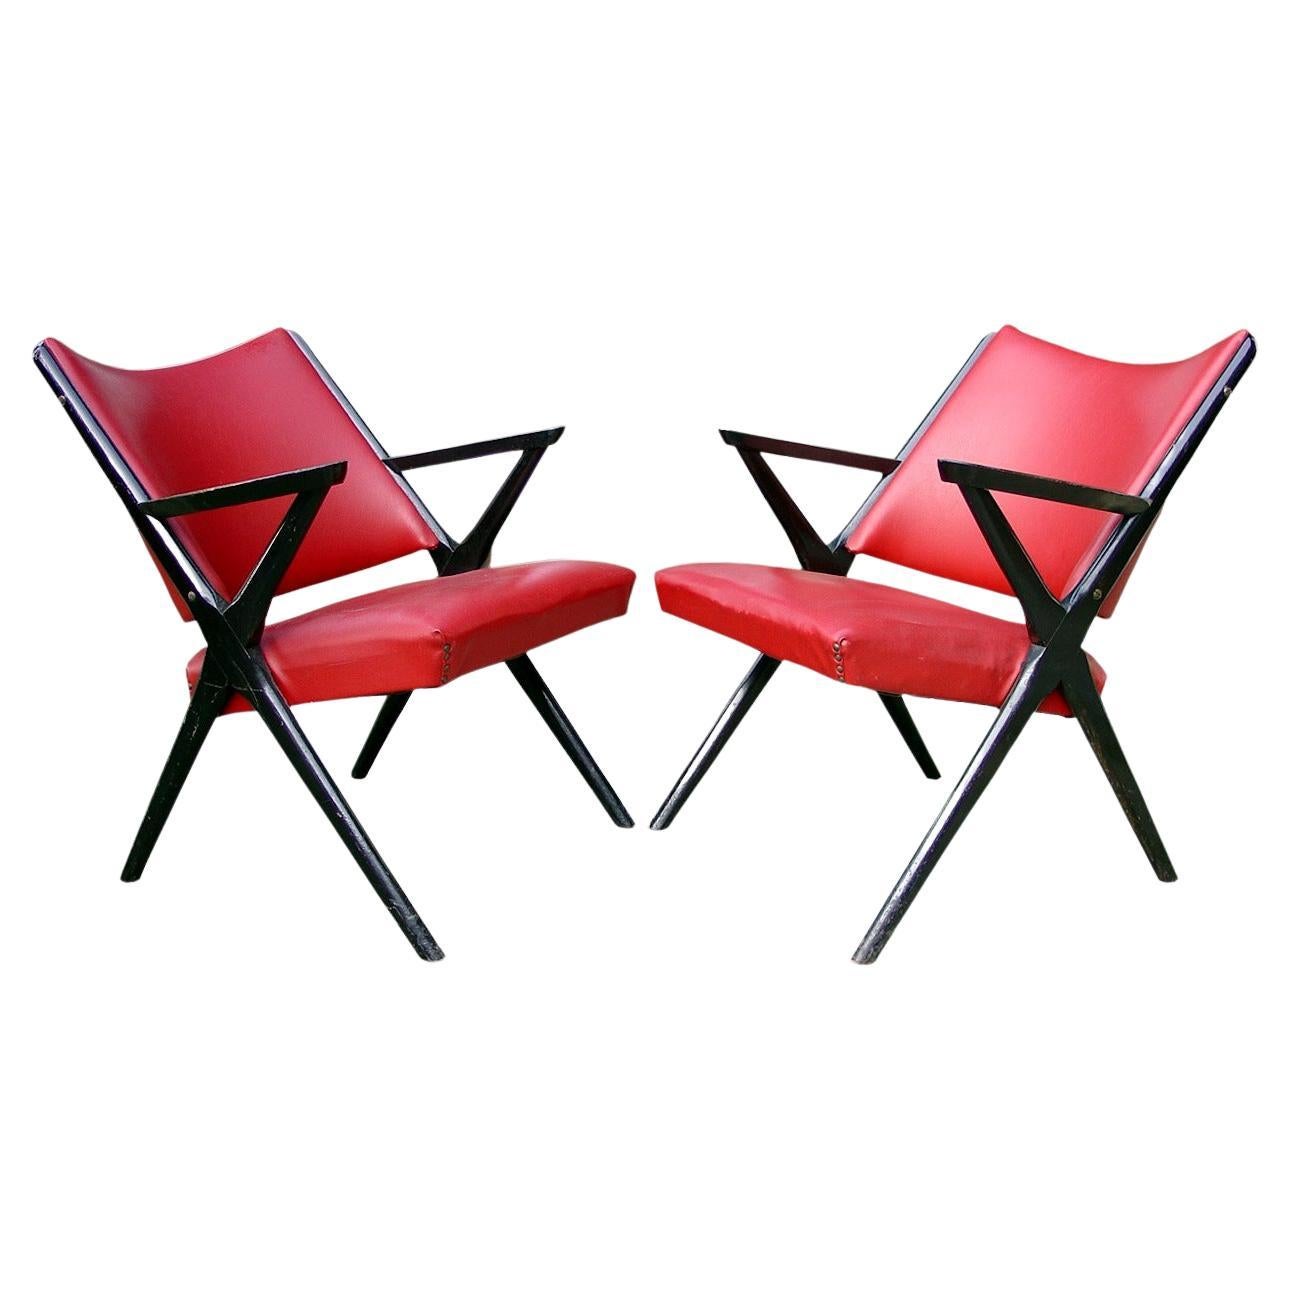 1960s Dal Vera Design Italy Arm Chairs- Set of 2 For Sale